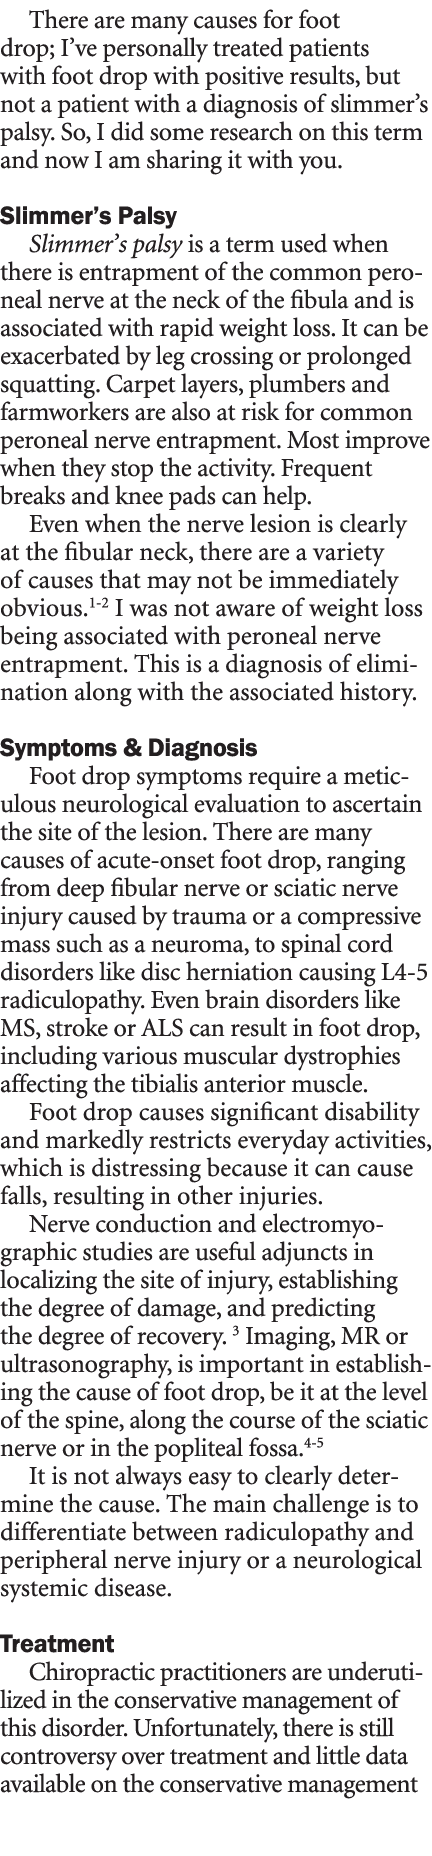 There are many causes for foot drop; I’ve personally treated patients with foot drop with positive results, but not a...